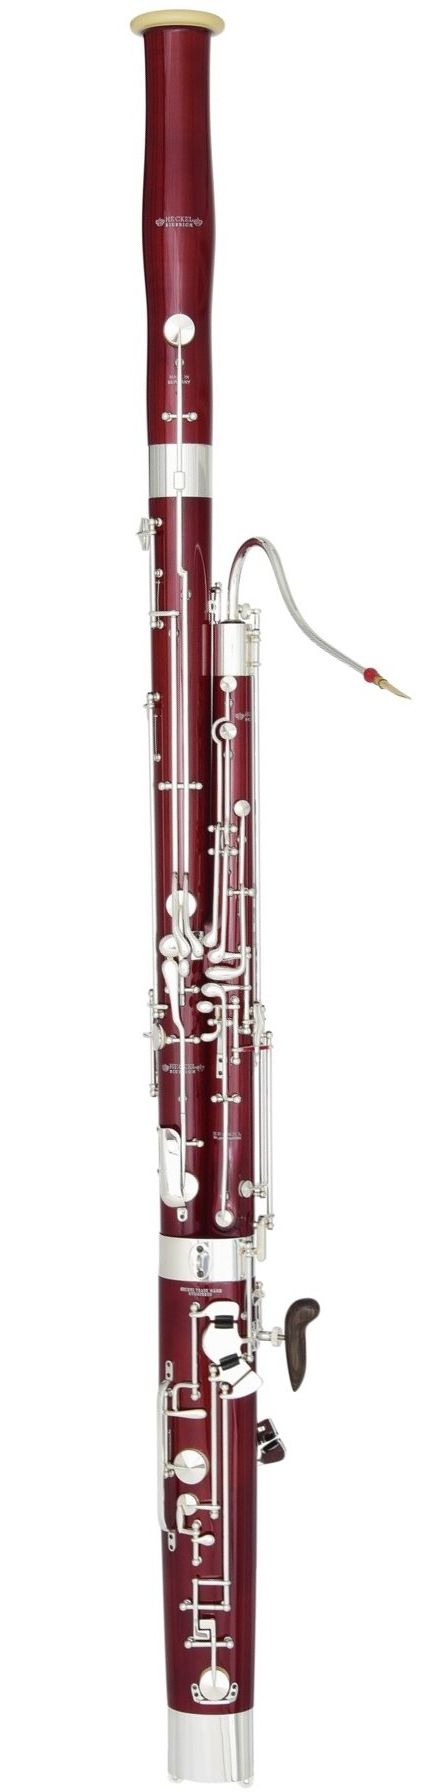 Picture of a Heckel Bassoon.